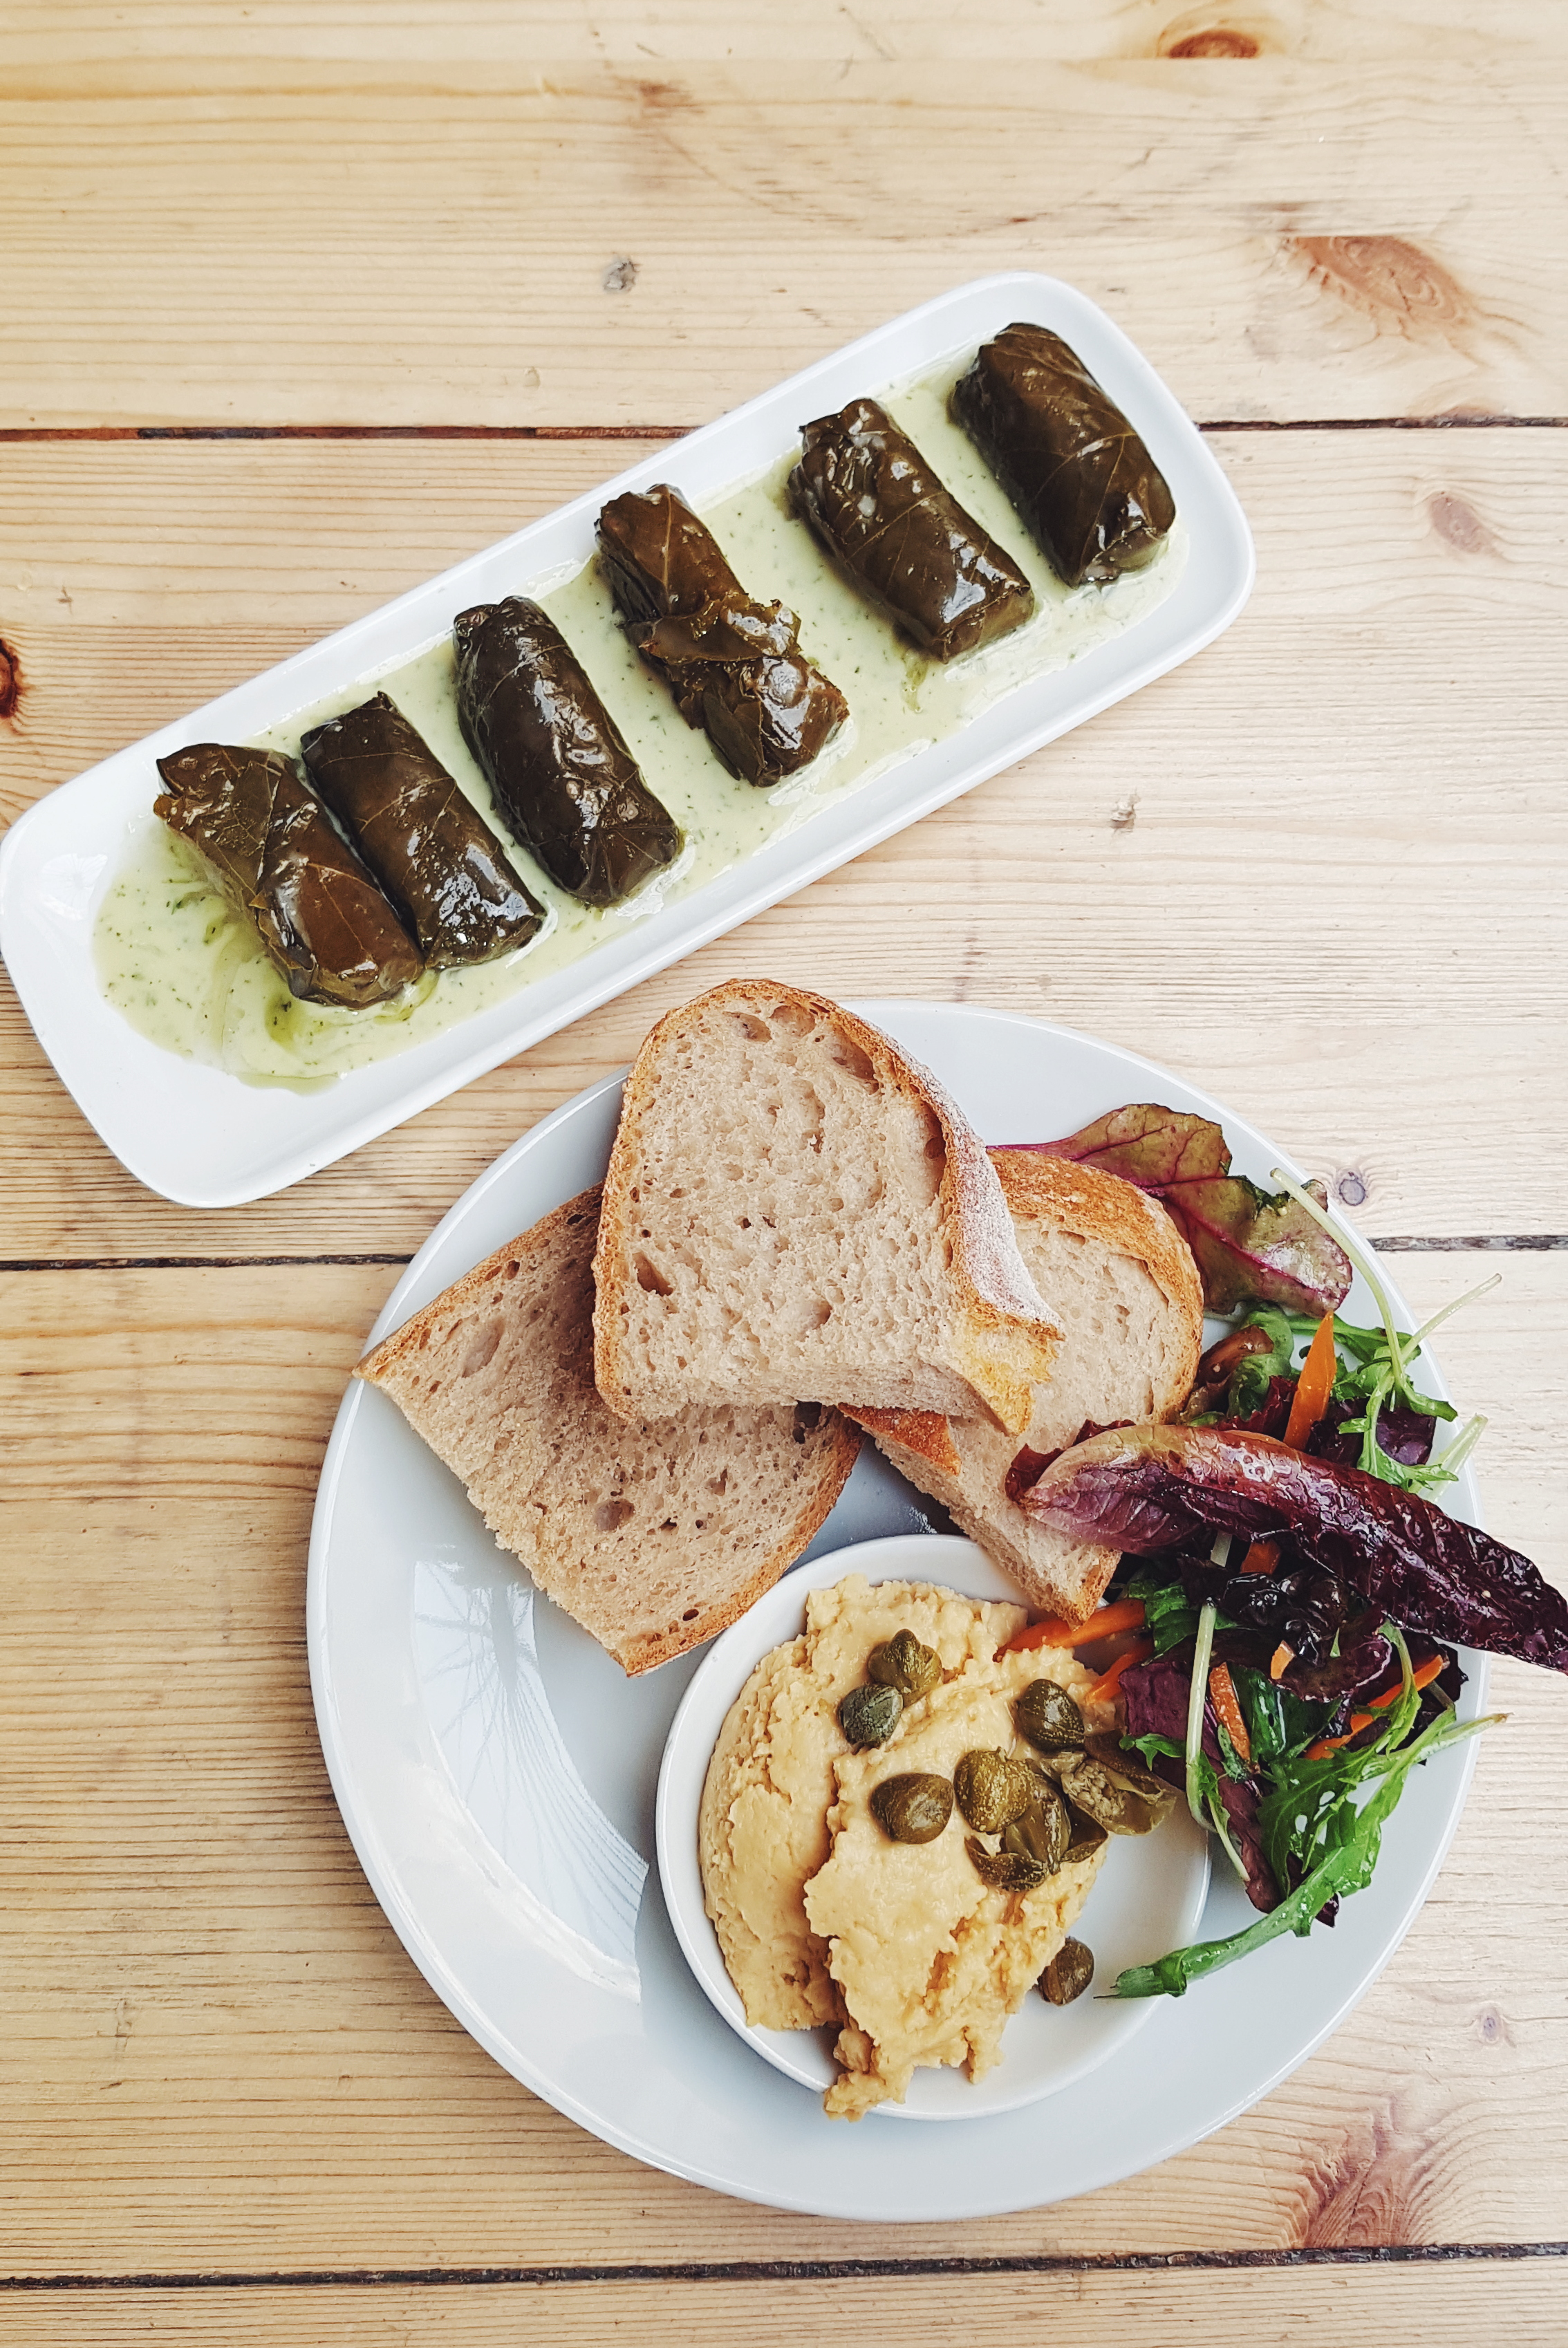 Humus and Dolmades for starters at Mono Glasgow